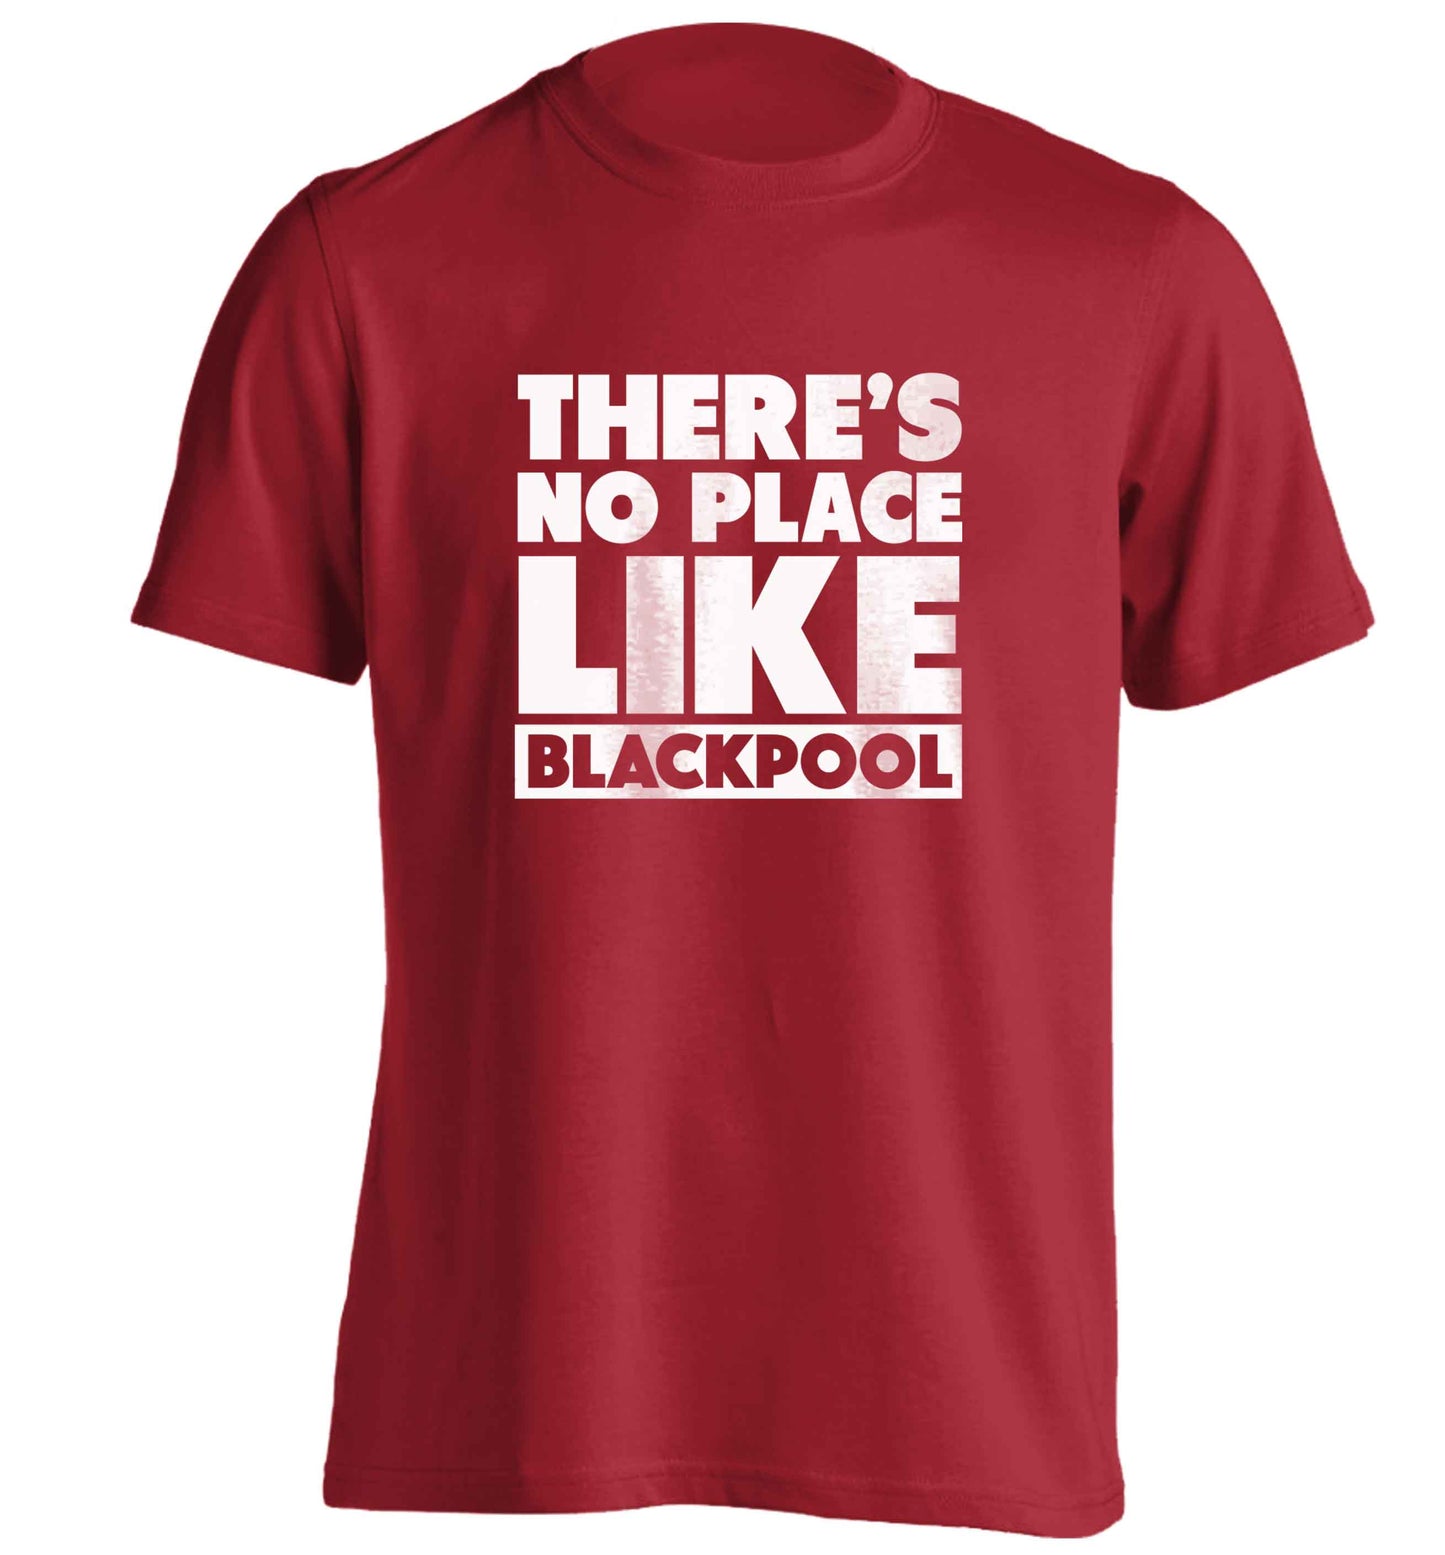 There's no place like Blackpool adults unisex red Tshirt 2XL